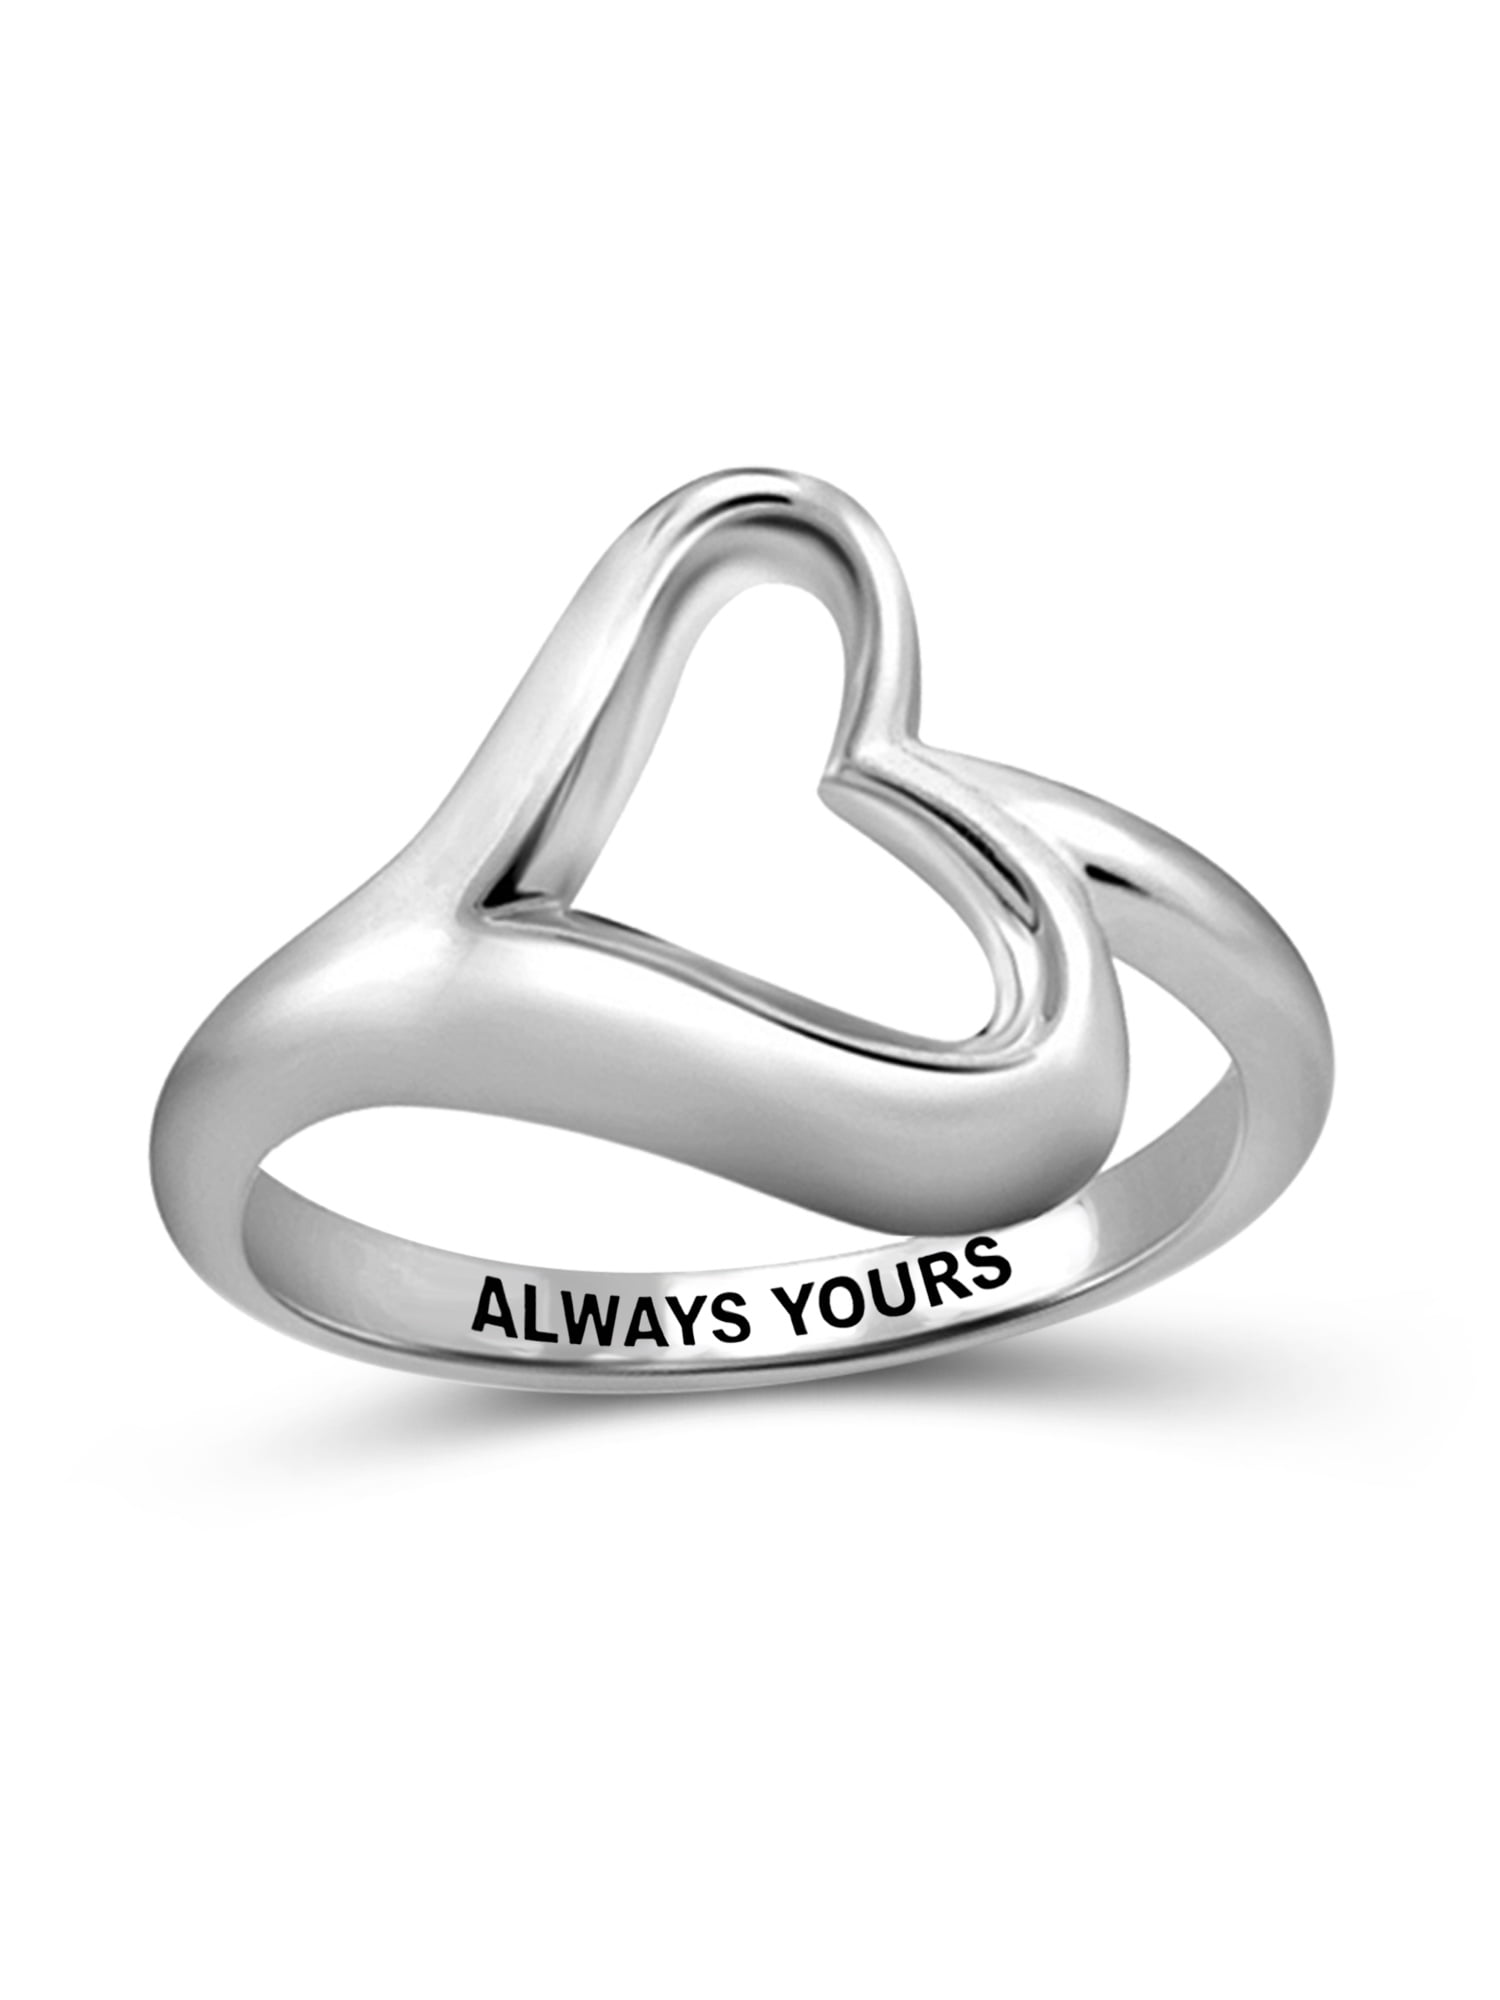 I Love You to the Moon and Back Ring Heart .925 Sterling Silver Band Sizes 4-10 